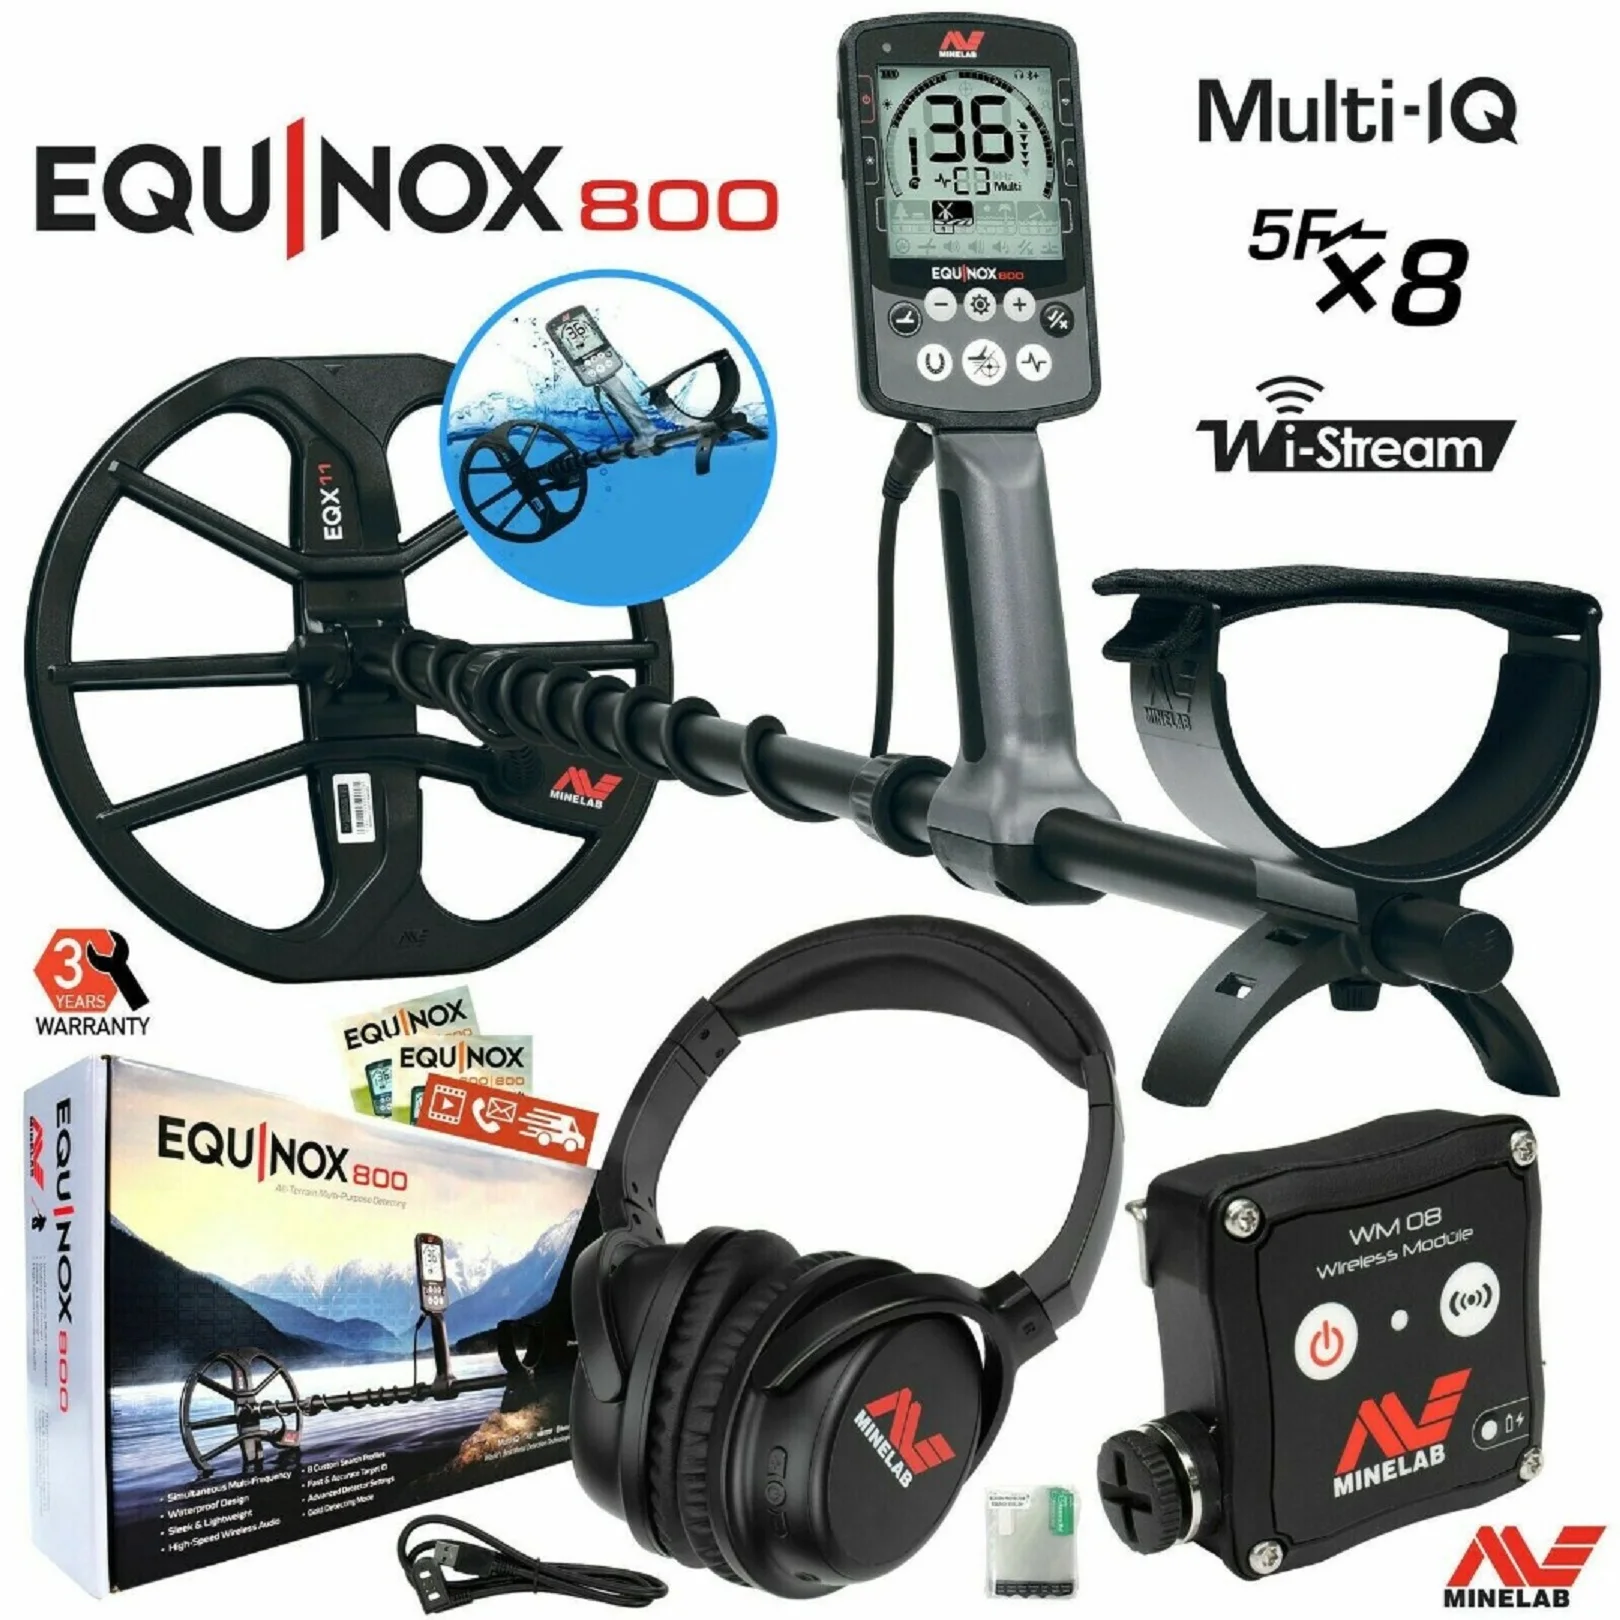 

Hot Discounted Sales on Minelab Equinox 800 Metal Detector with EQX 11” Double-D Waterproof Coil